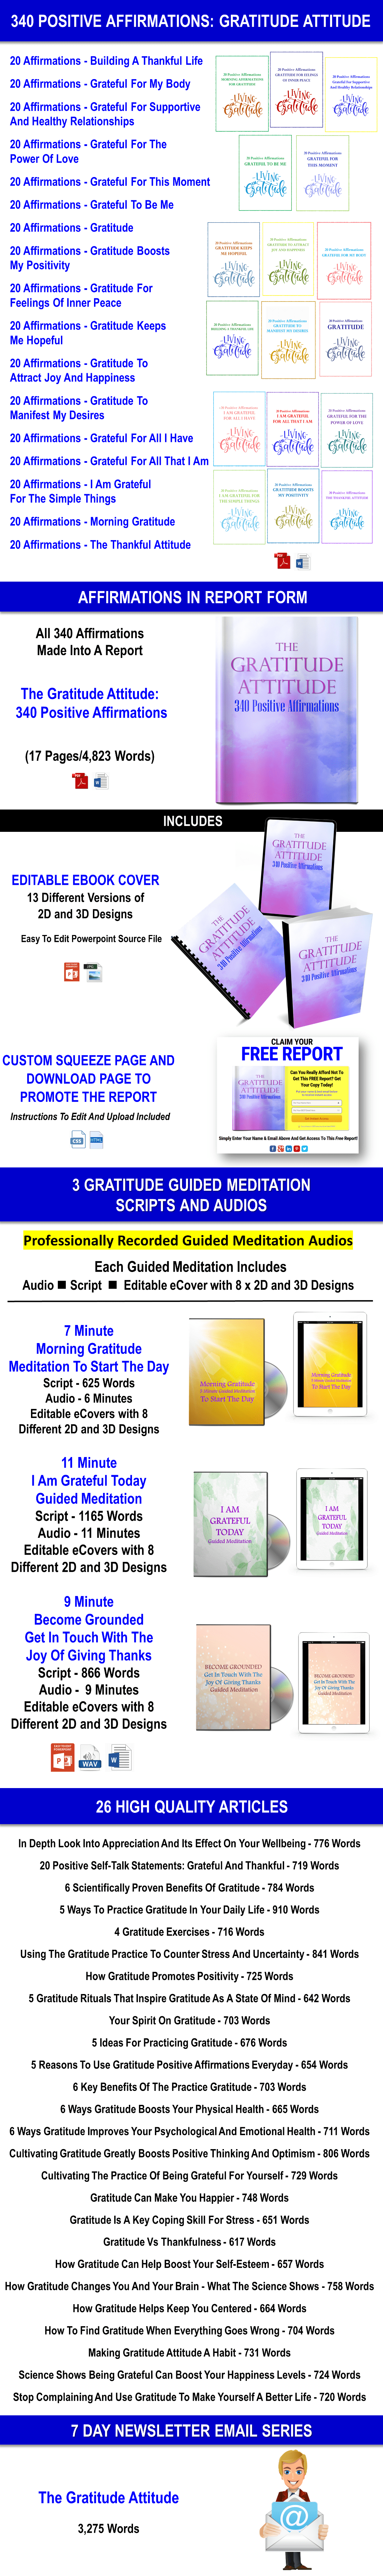 The Gratitude Attitude - 340 Affirmations And Guided Meditations Giant Content Pack PLR Rights